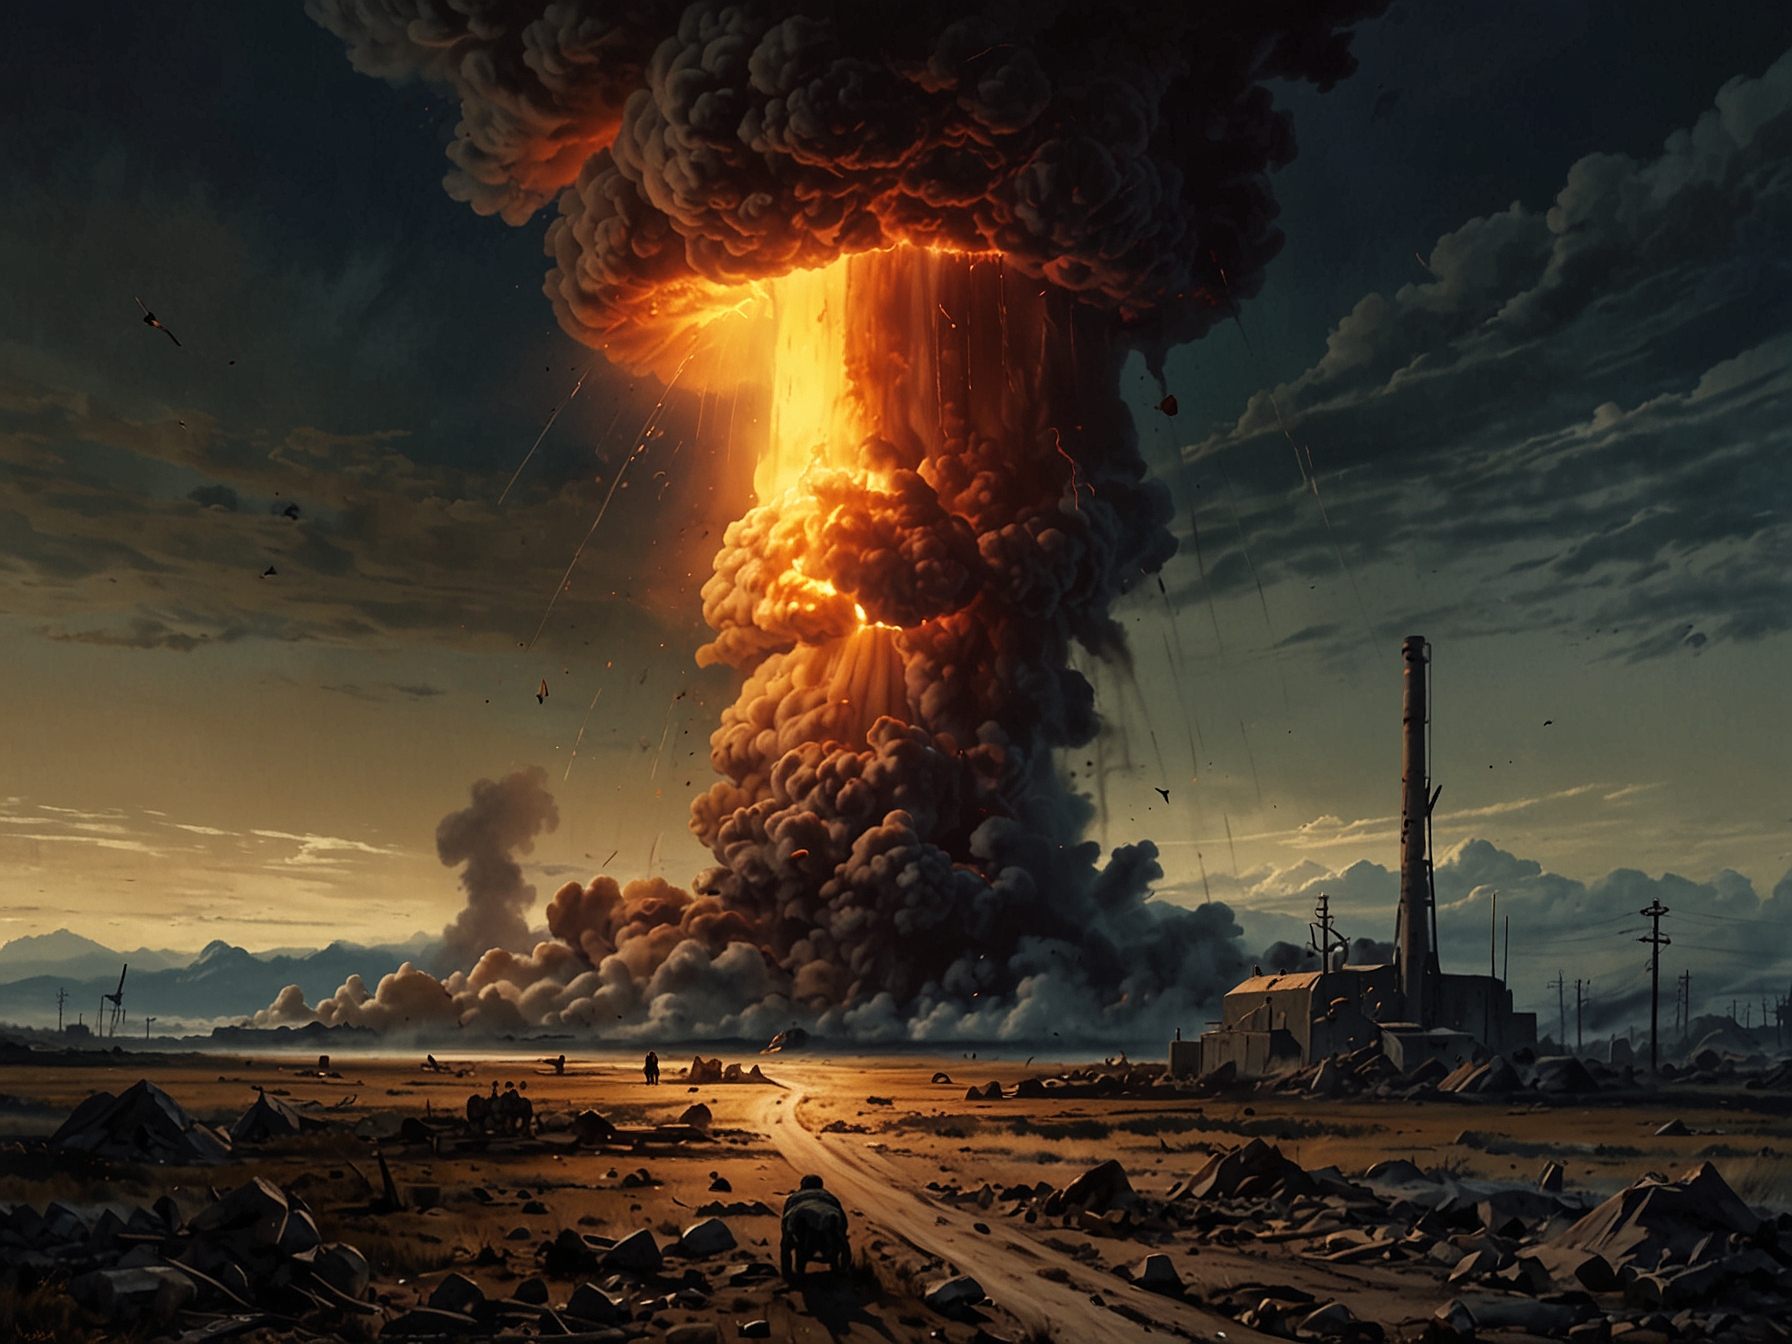 An evocative illustration depicting the potential devastation of a nuclear explosion, emphasizing the article's points on the environmental, ethical, and human costs of maintaining such an arsenal.